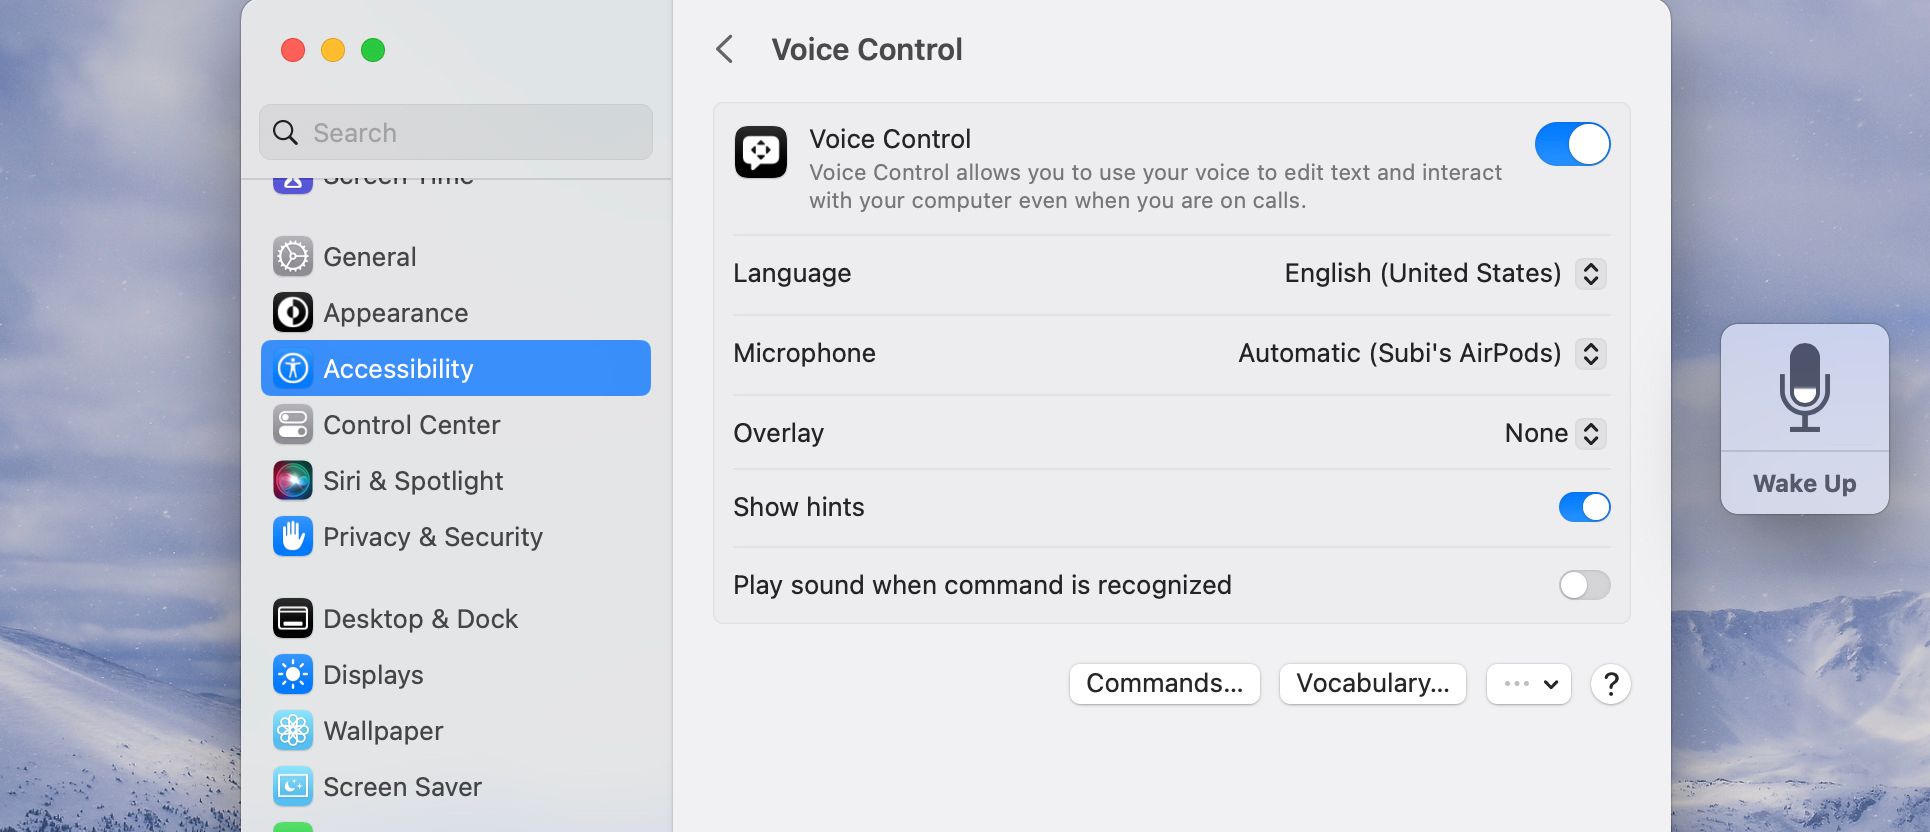 Enabling Voice Control Spelling Mode